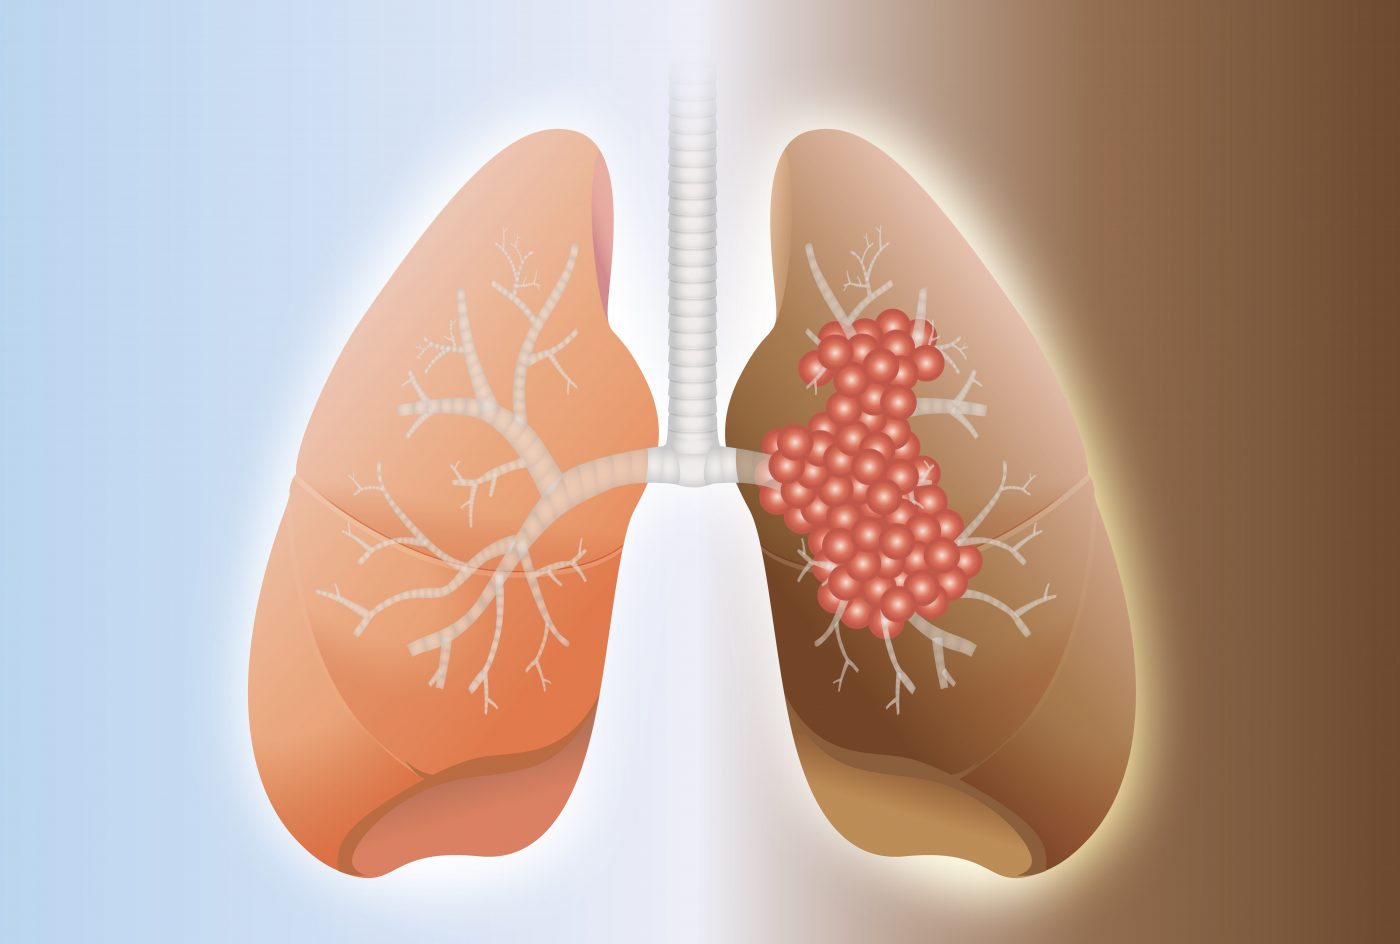 India Idiopathic Pulmonary Fibrosis Treatment Market, Growth Insight, Epidemiology, Demand, Opportunity and Forecast by 2022-2027